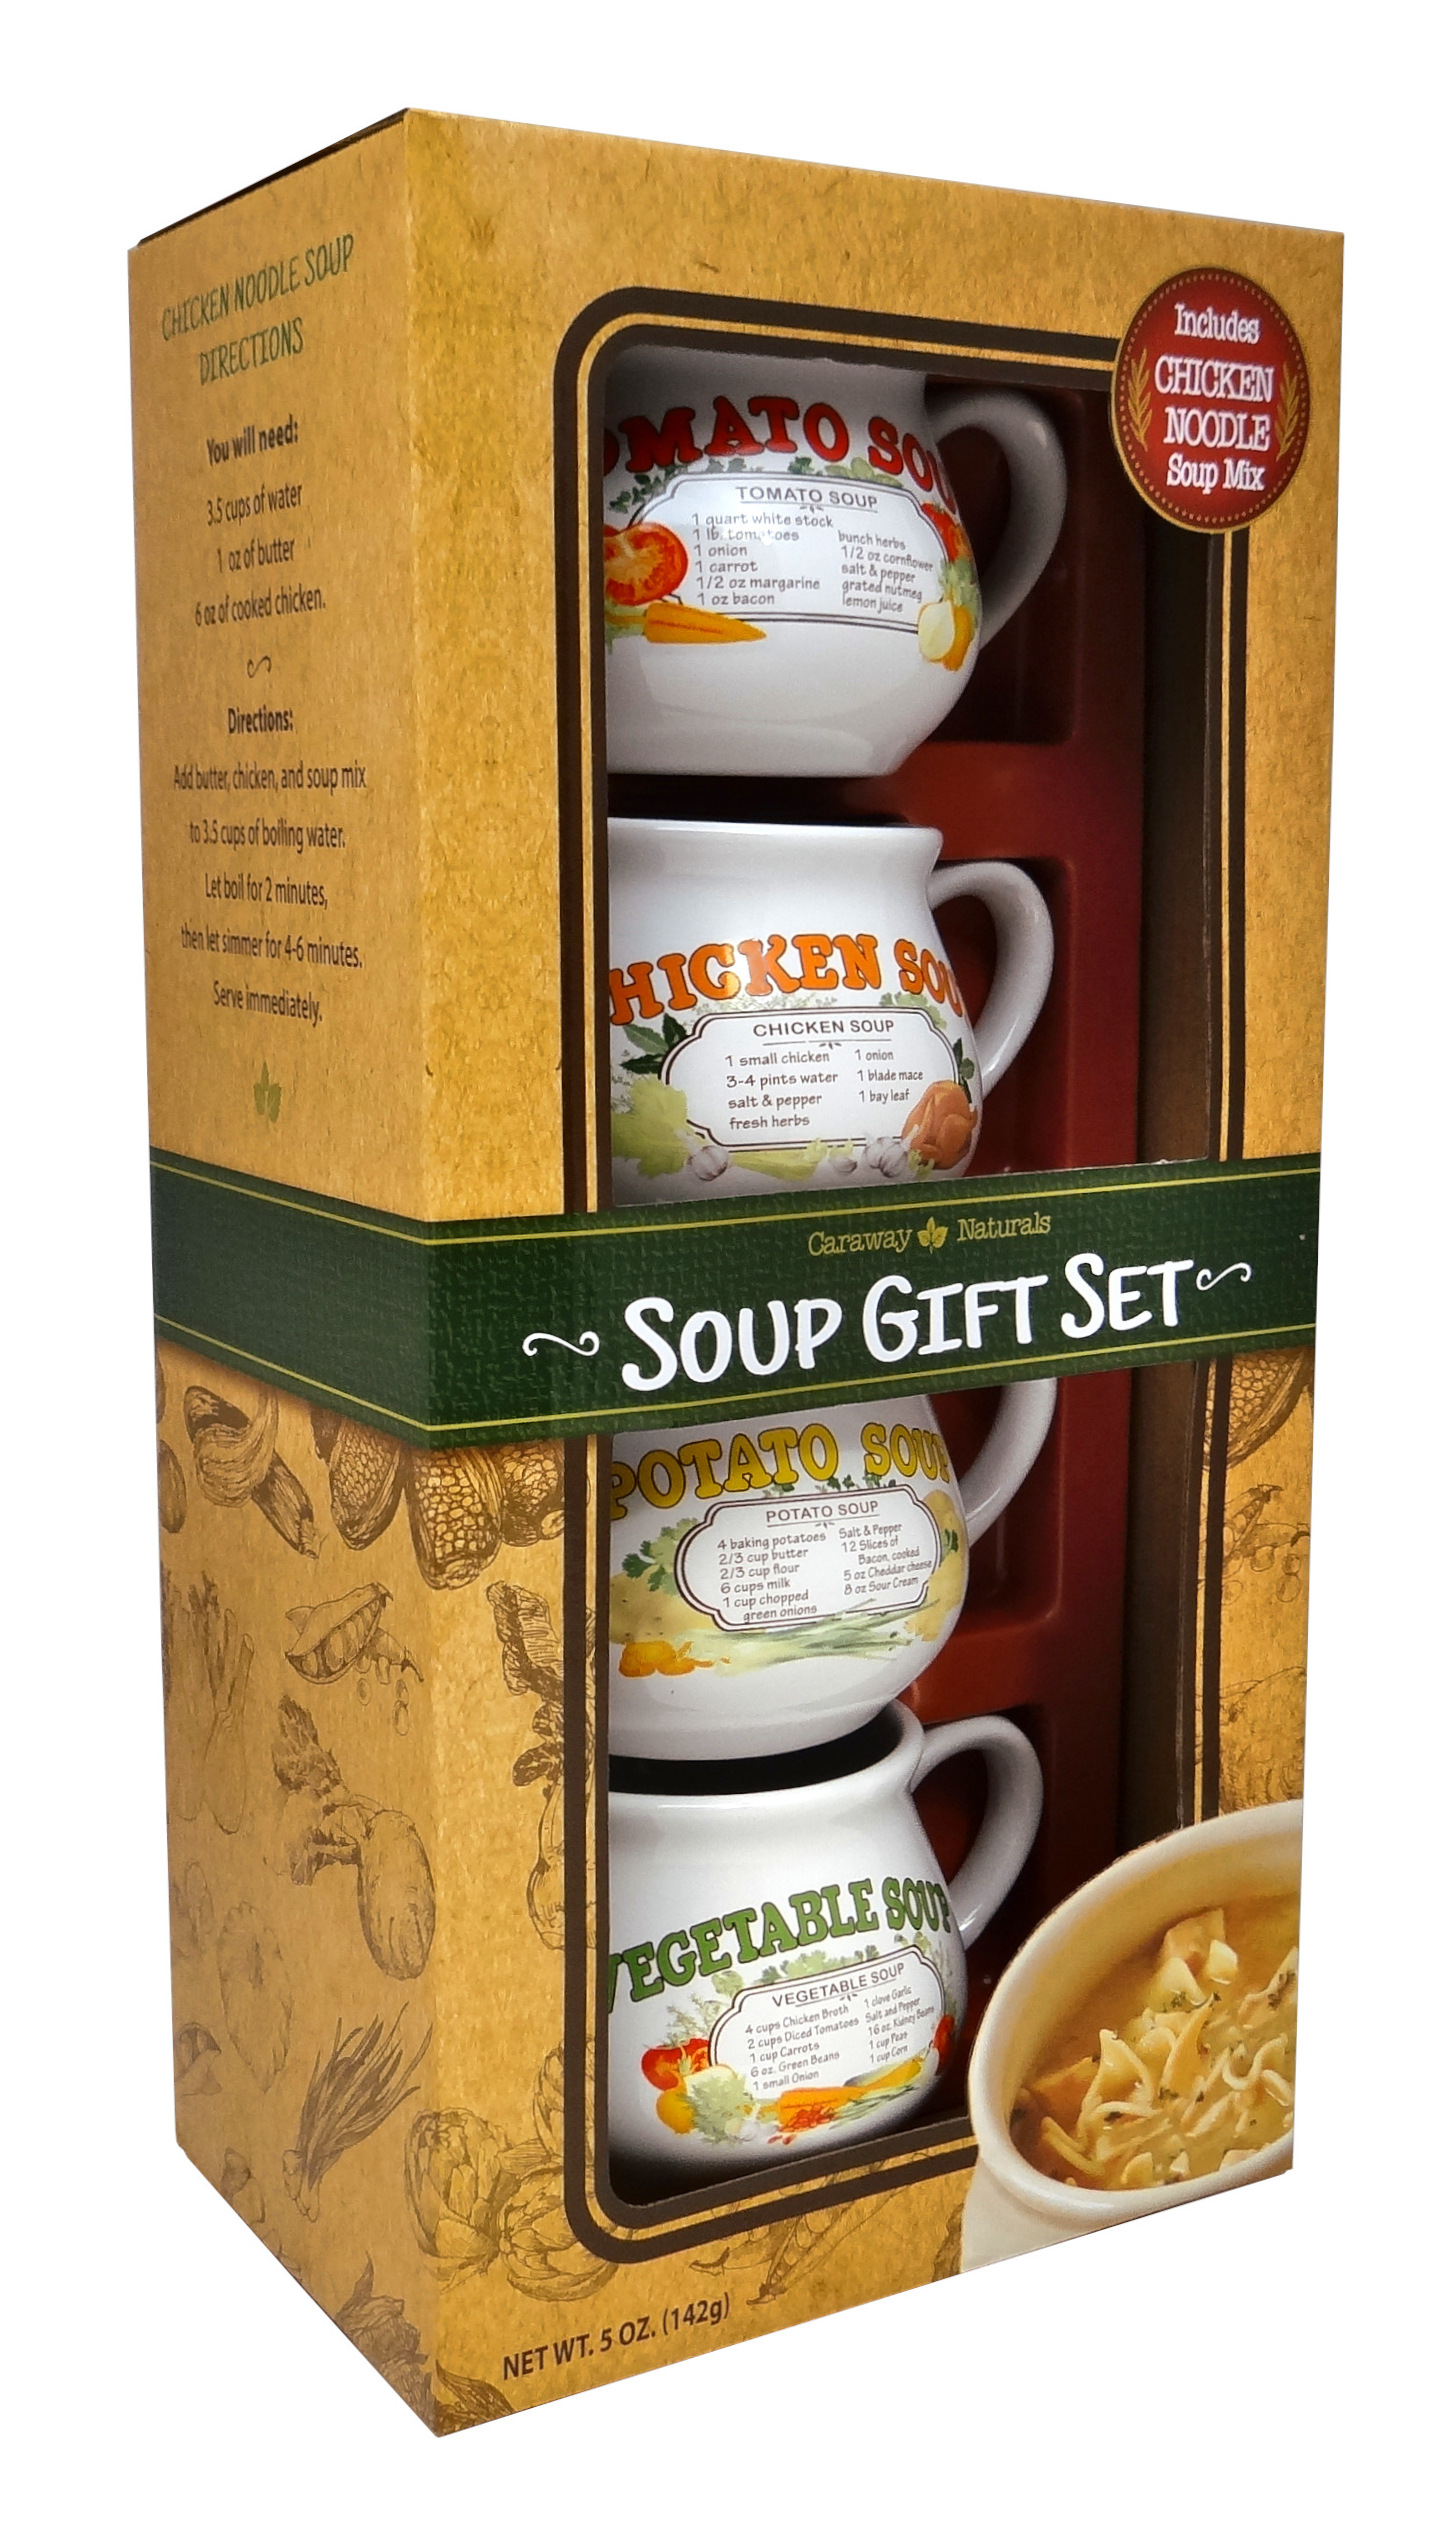 Nostalgic Soup Bowls Box Gift Set with Chicken Noodle Soup Mix by Caraway Naturals, 5oz, 1ct - image 3 of 11